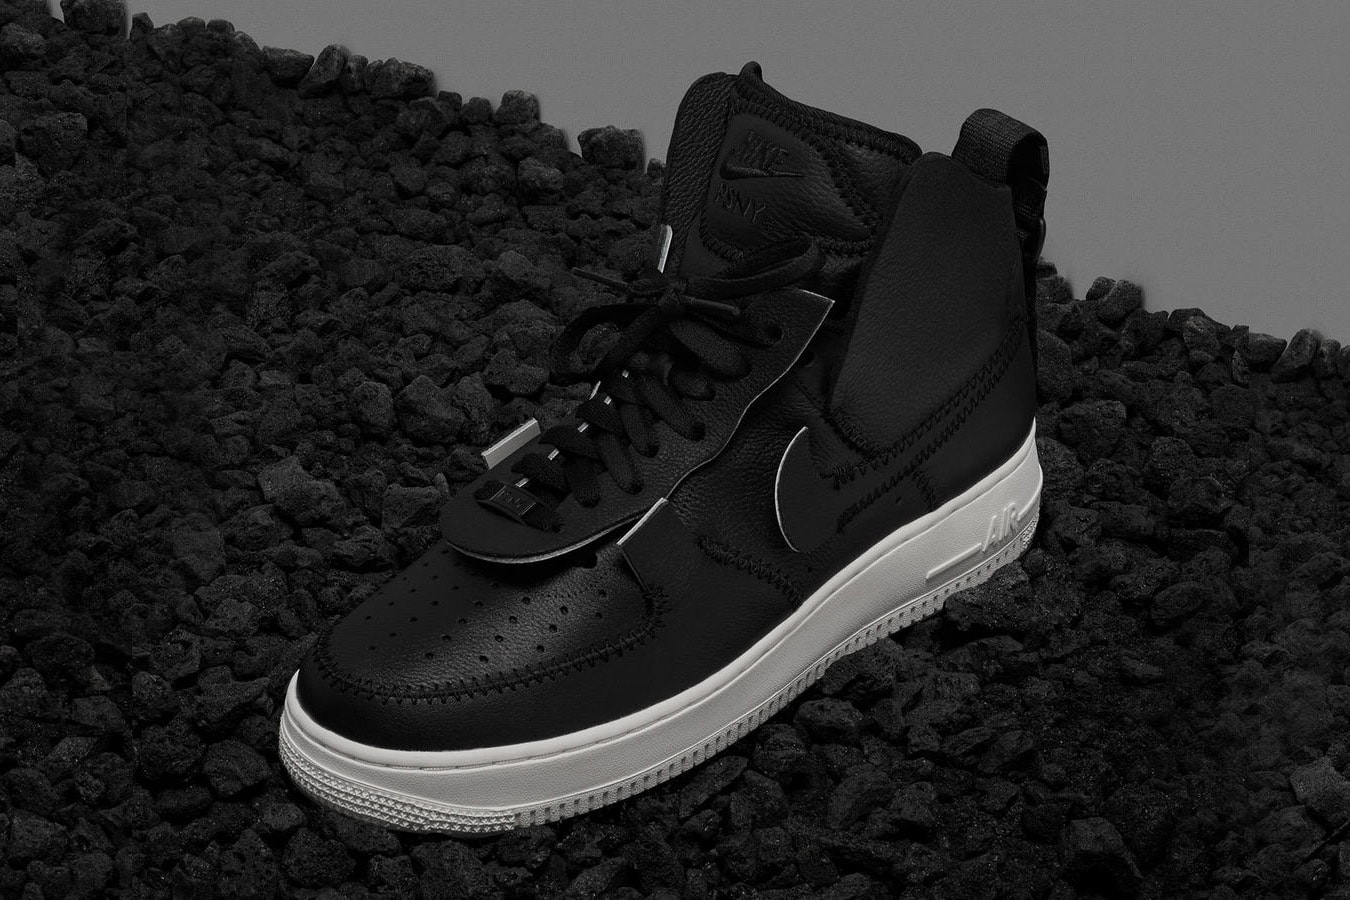 Publyc School NYC Nike Air Force 1 Collaboration Grey Black White Release Date